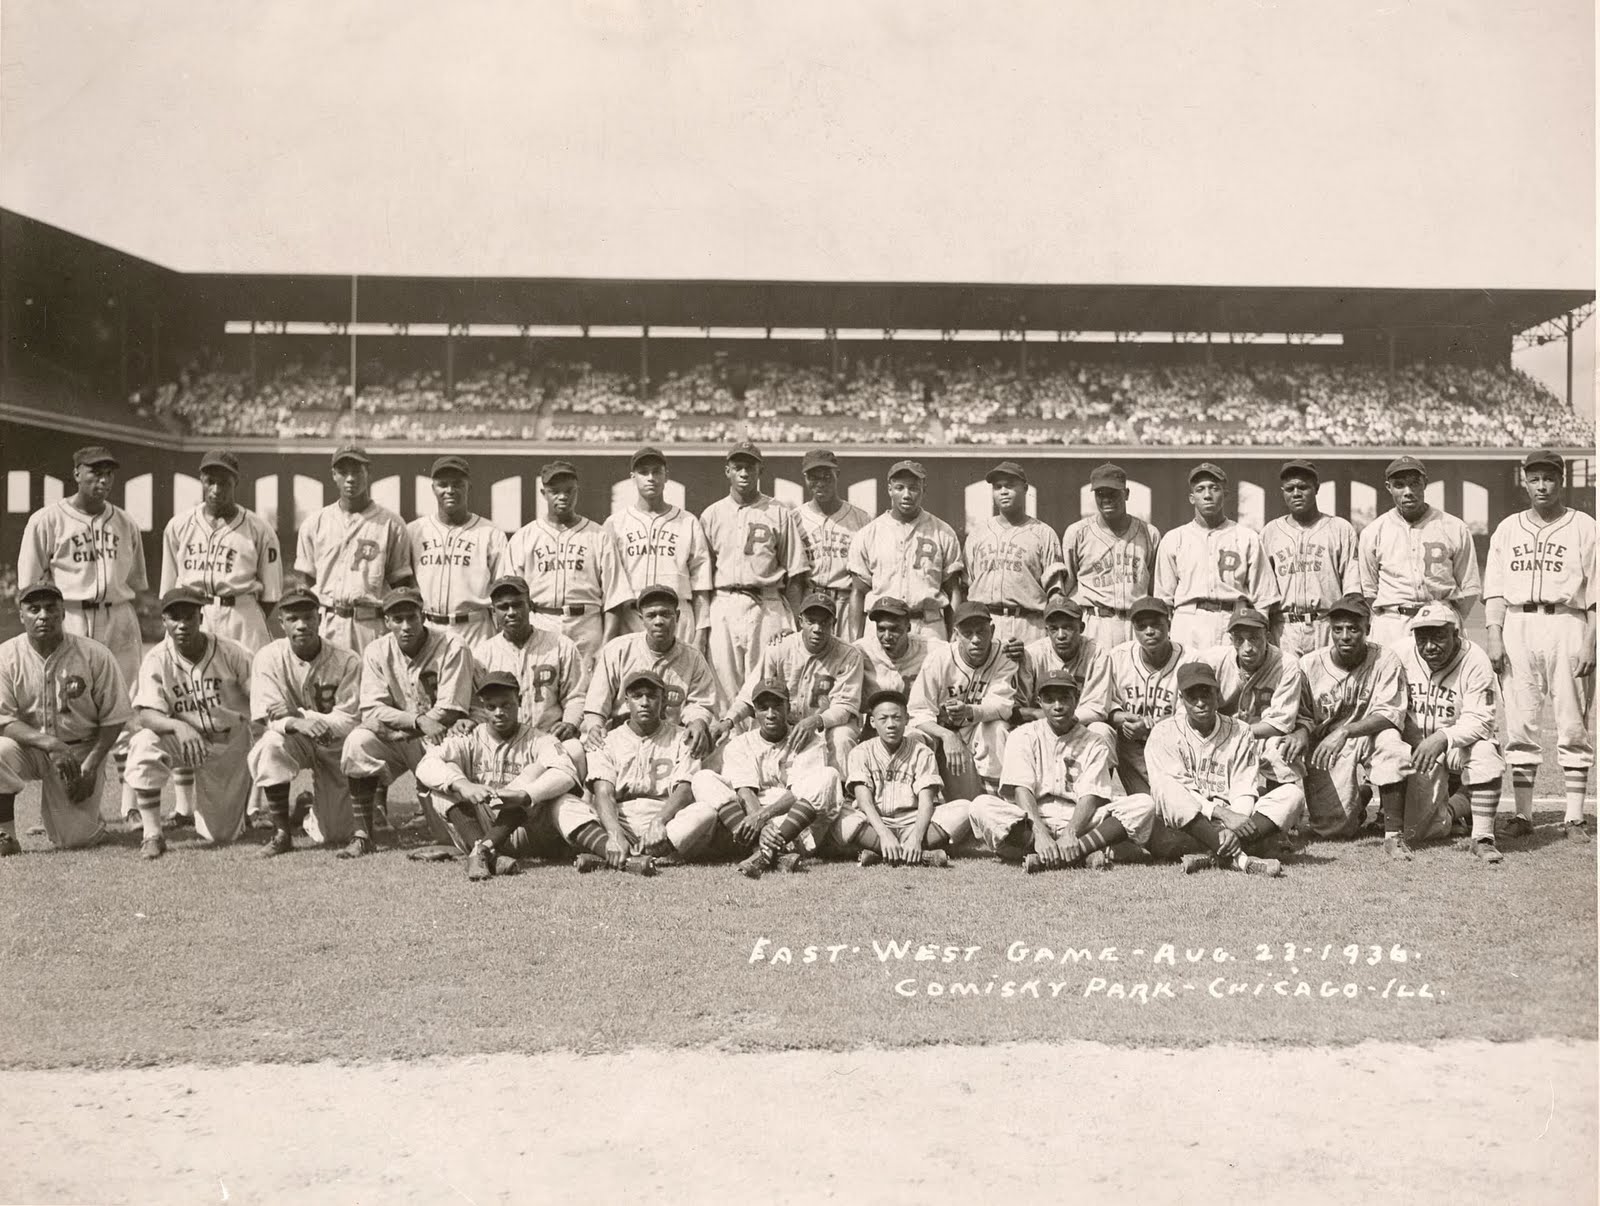 The 1936 Negro League All Stars at the old Comisky Park. 